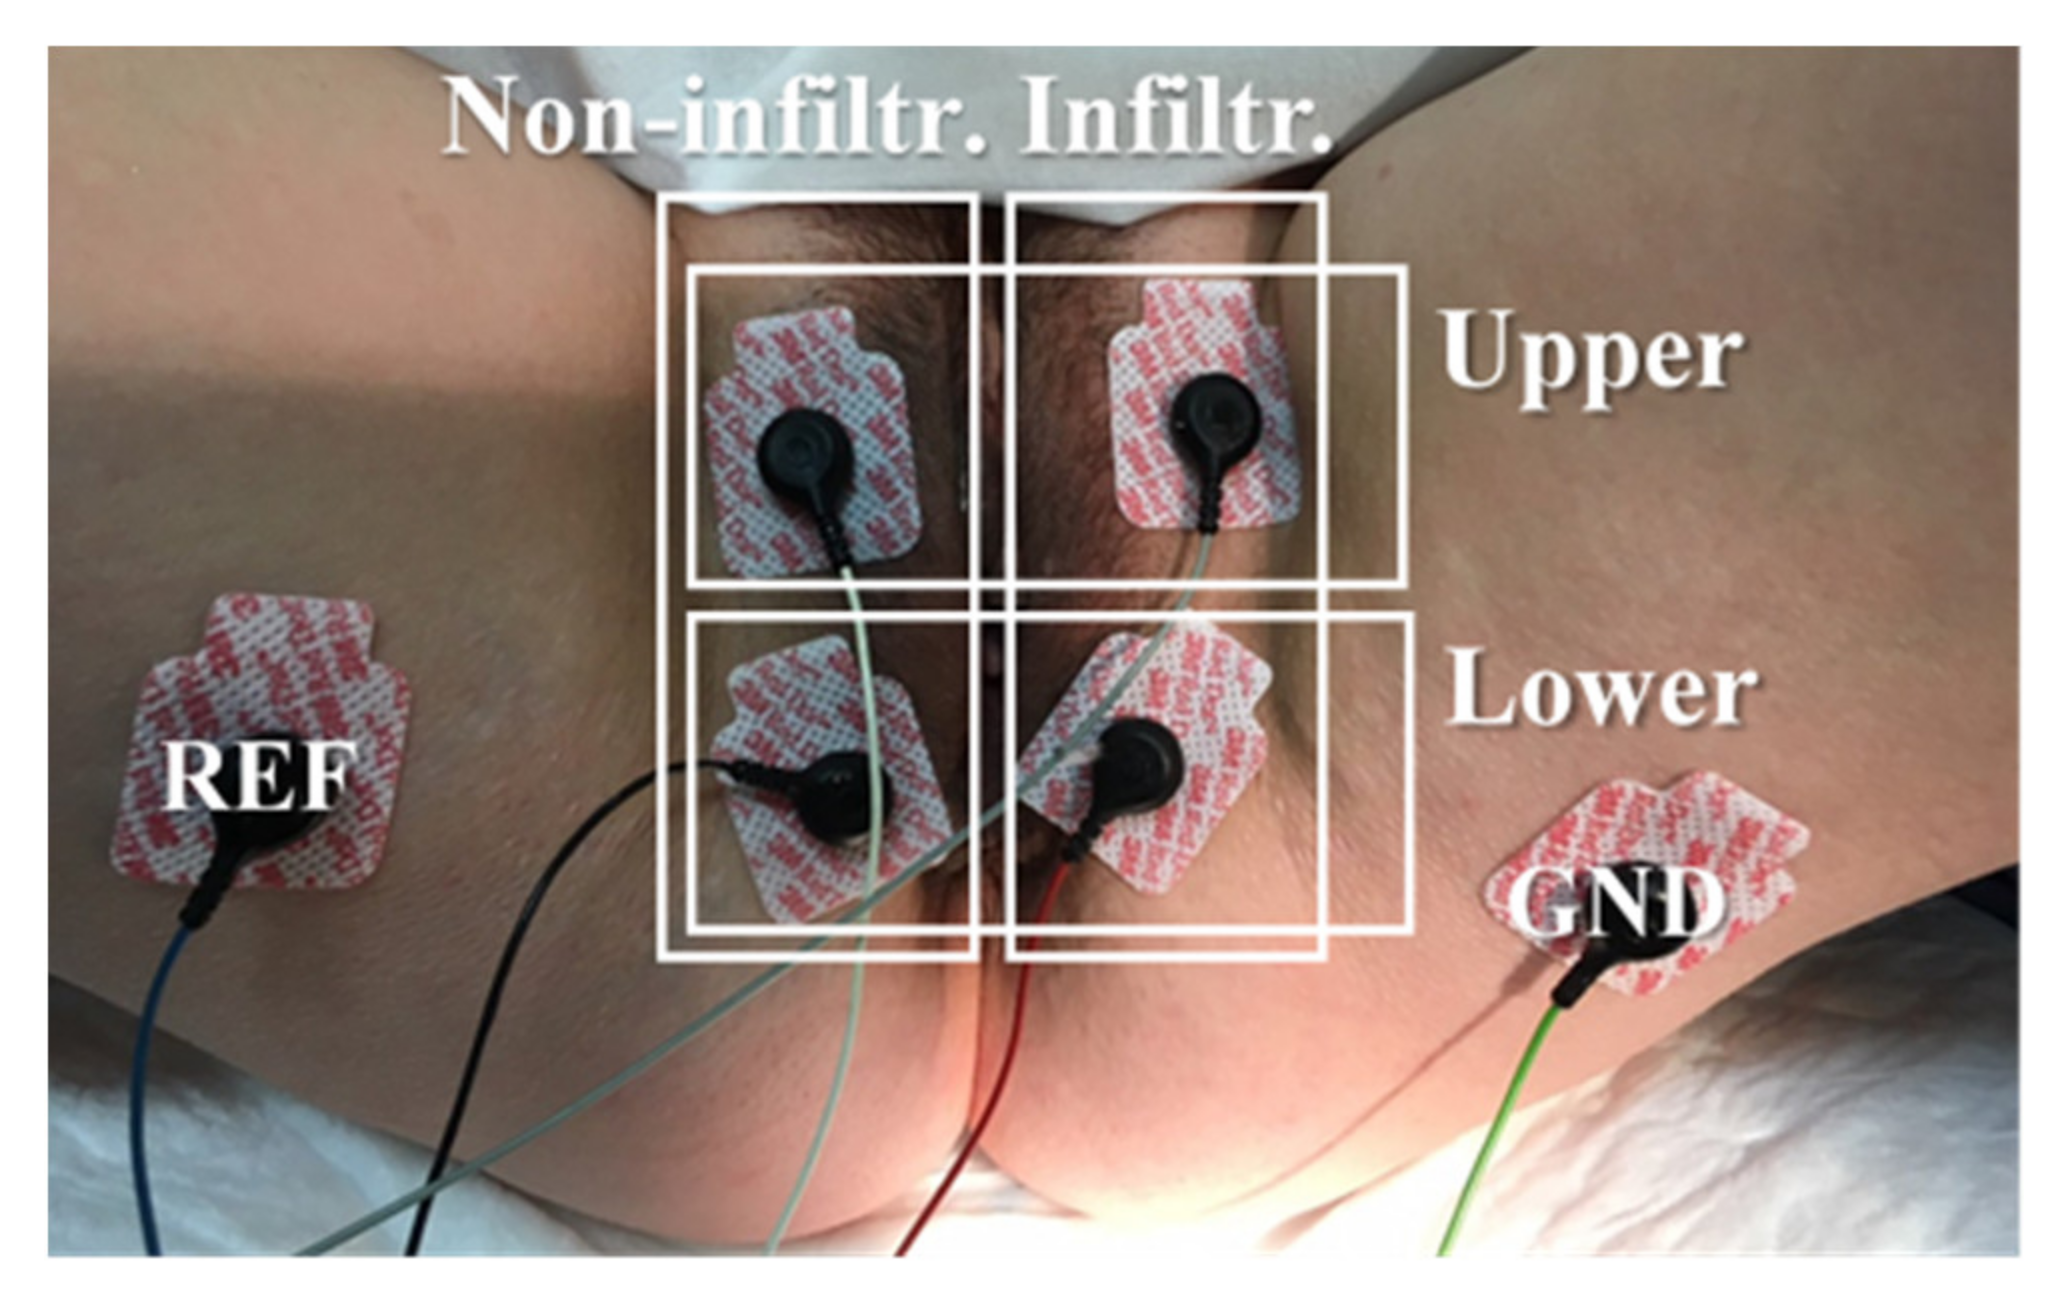 andrew sperber recommends tens unit and sex pic